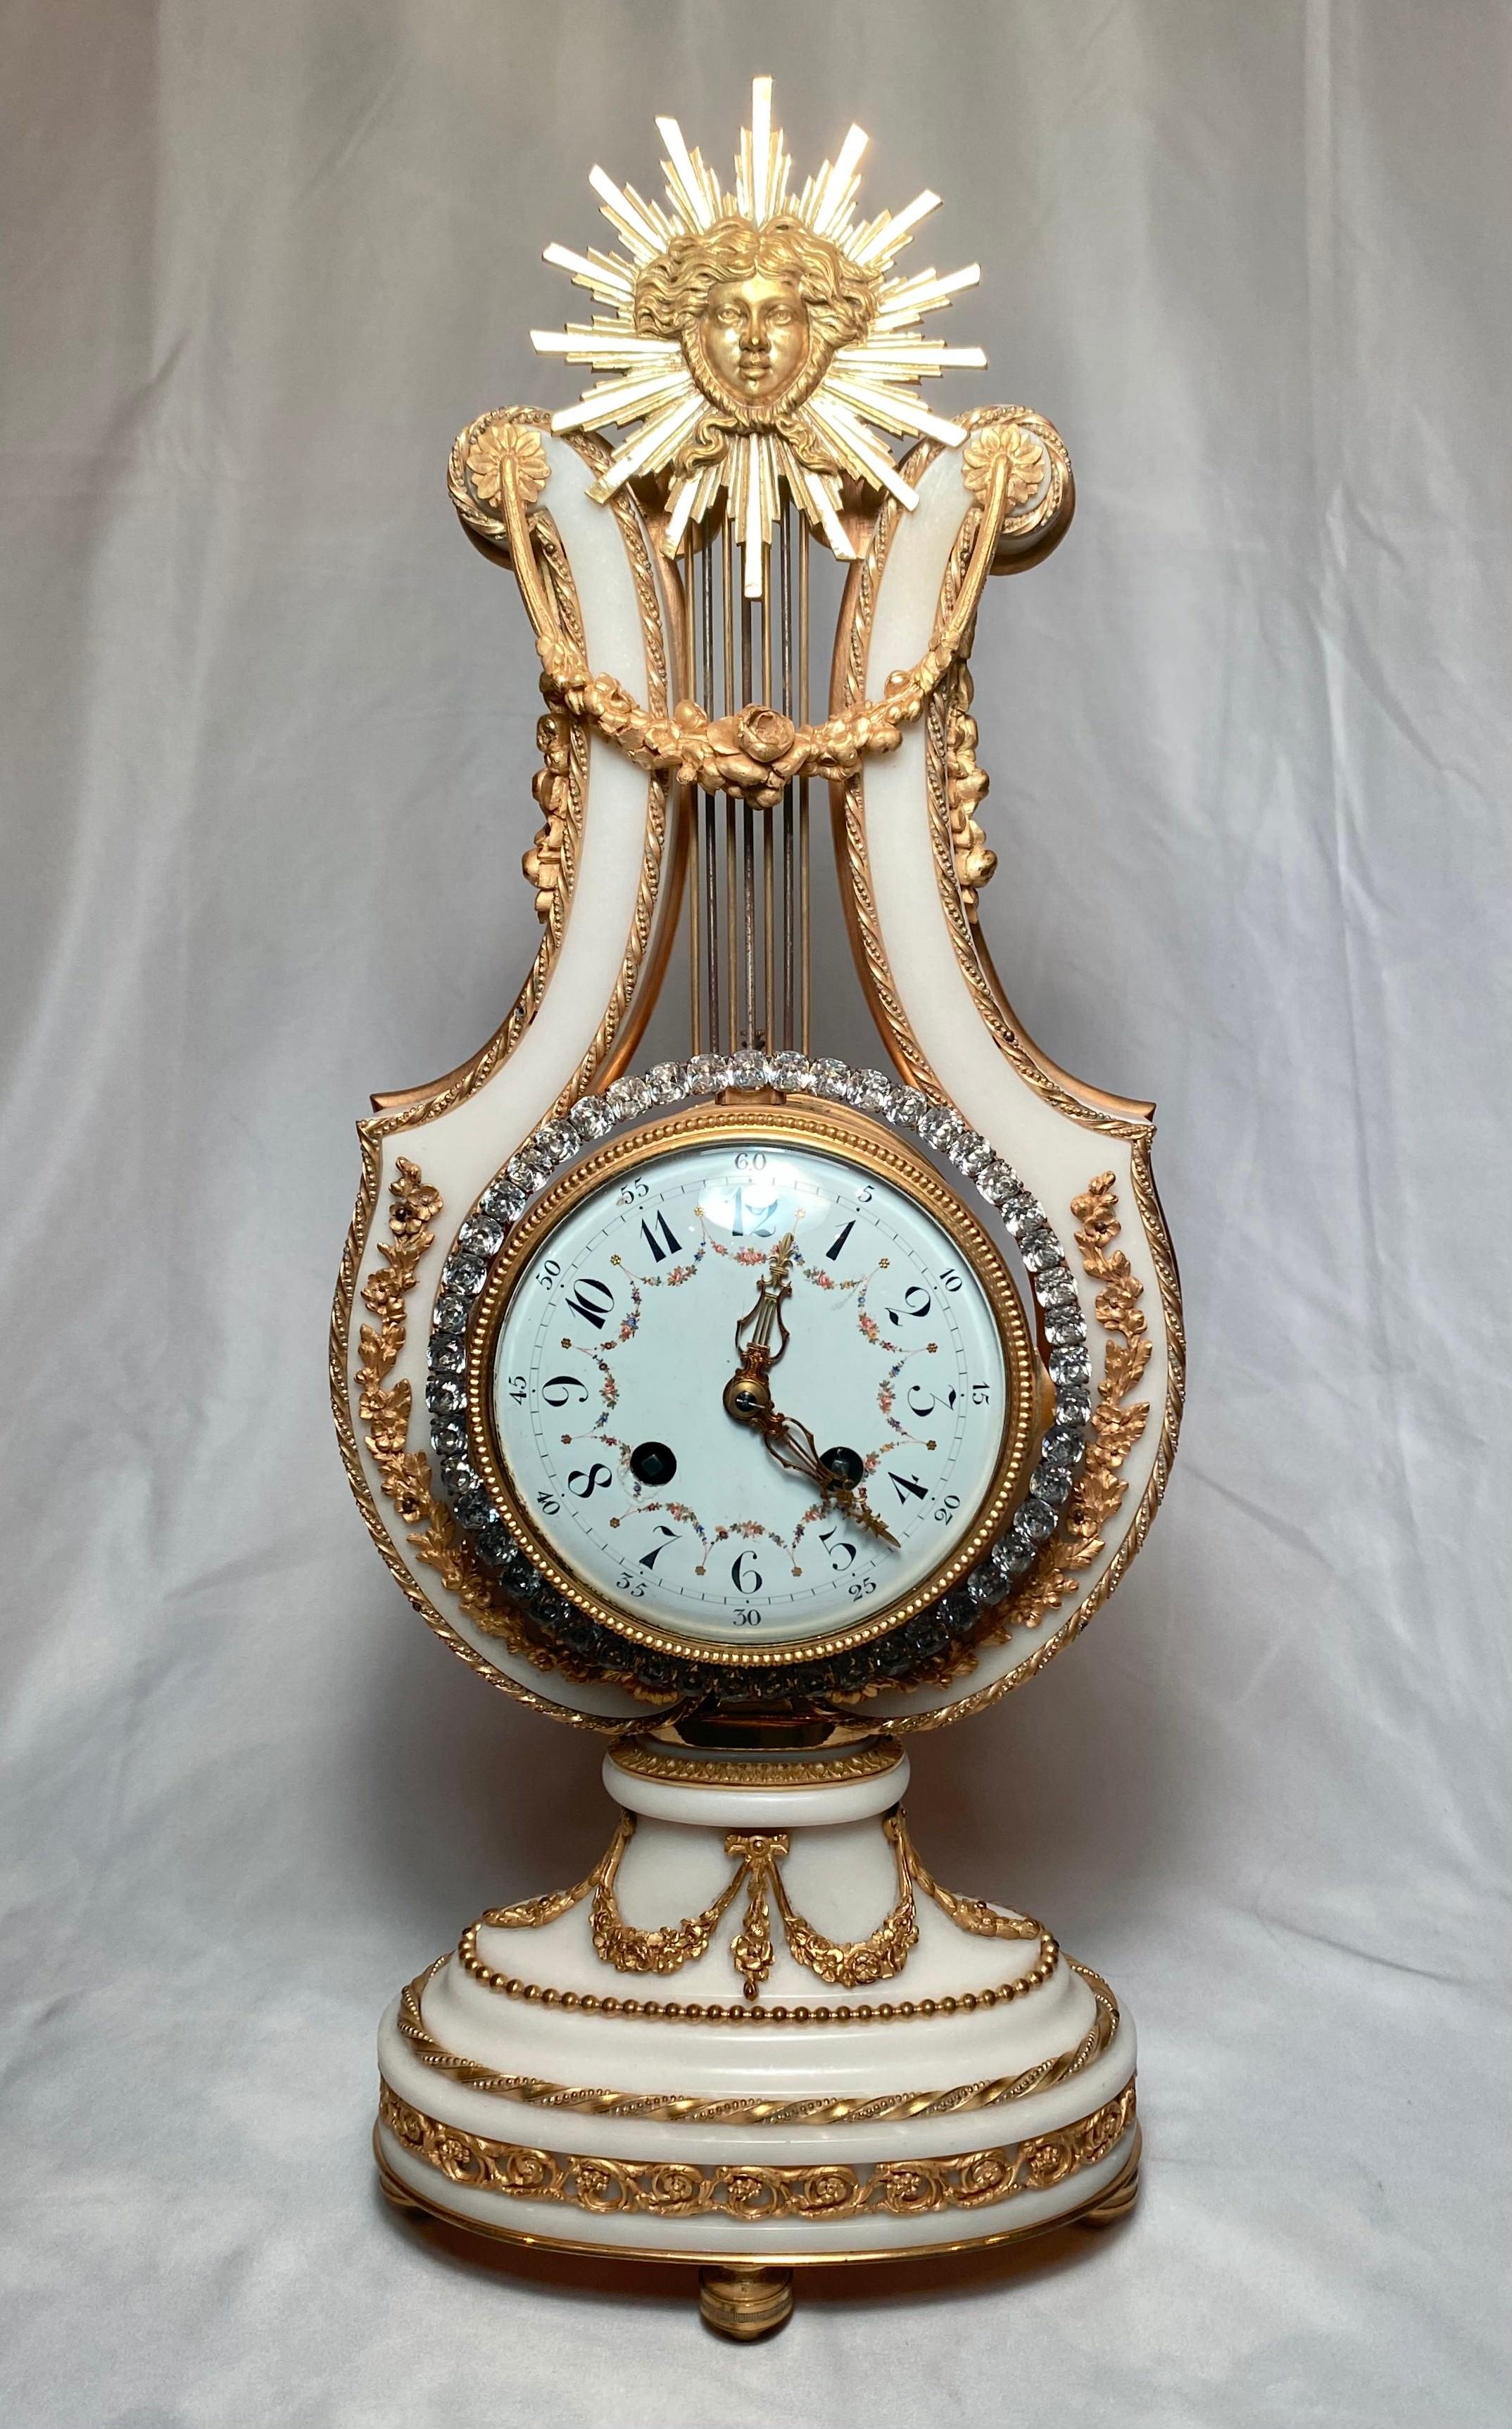 Exquisite antique 19th century French marble and gold bronze 3 piece clock set.